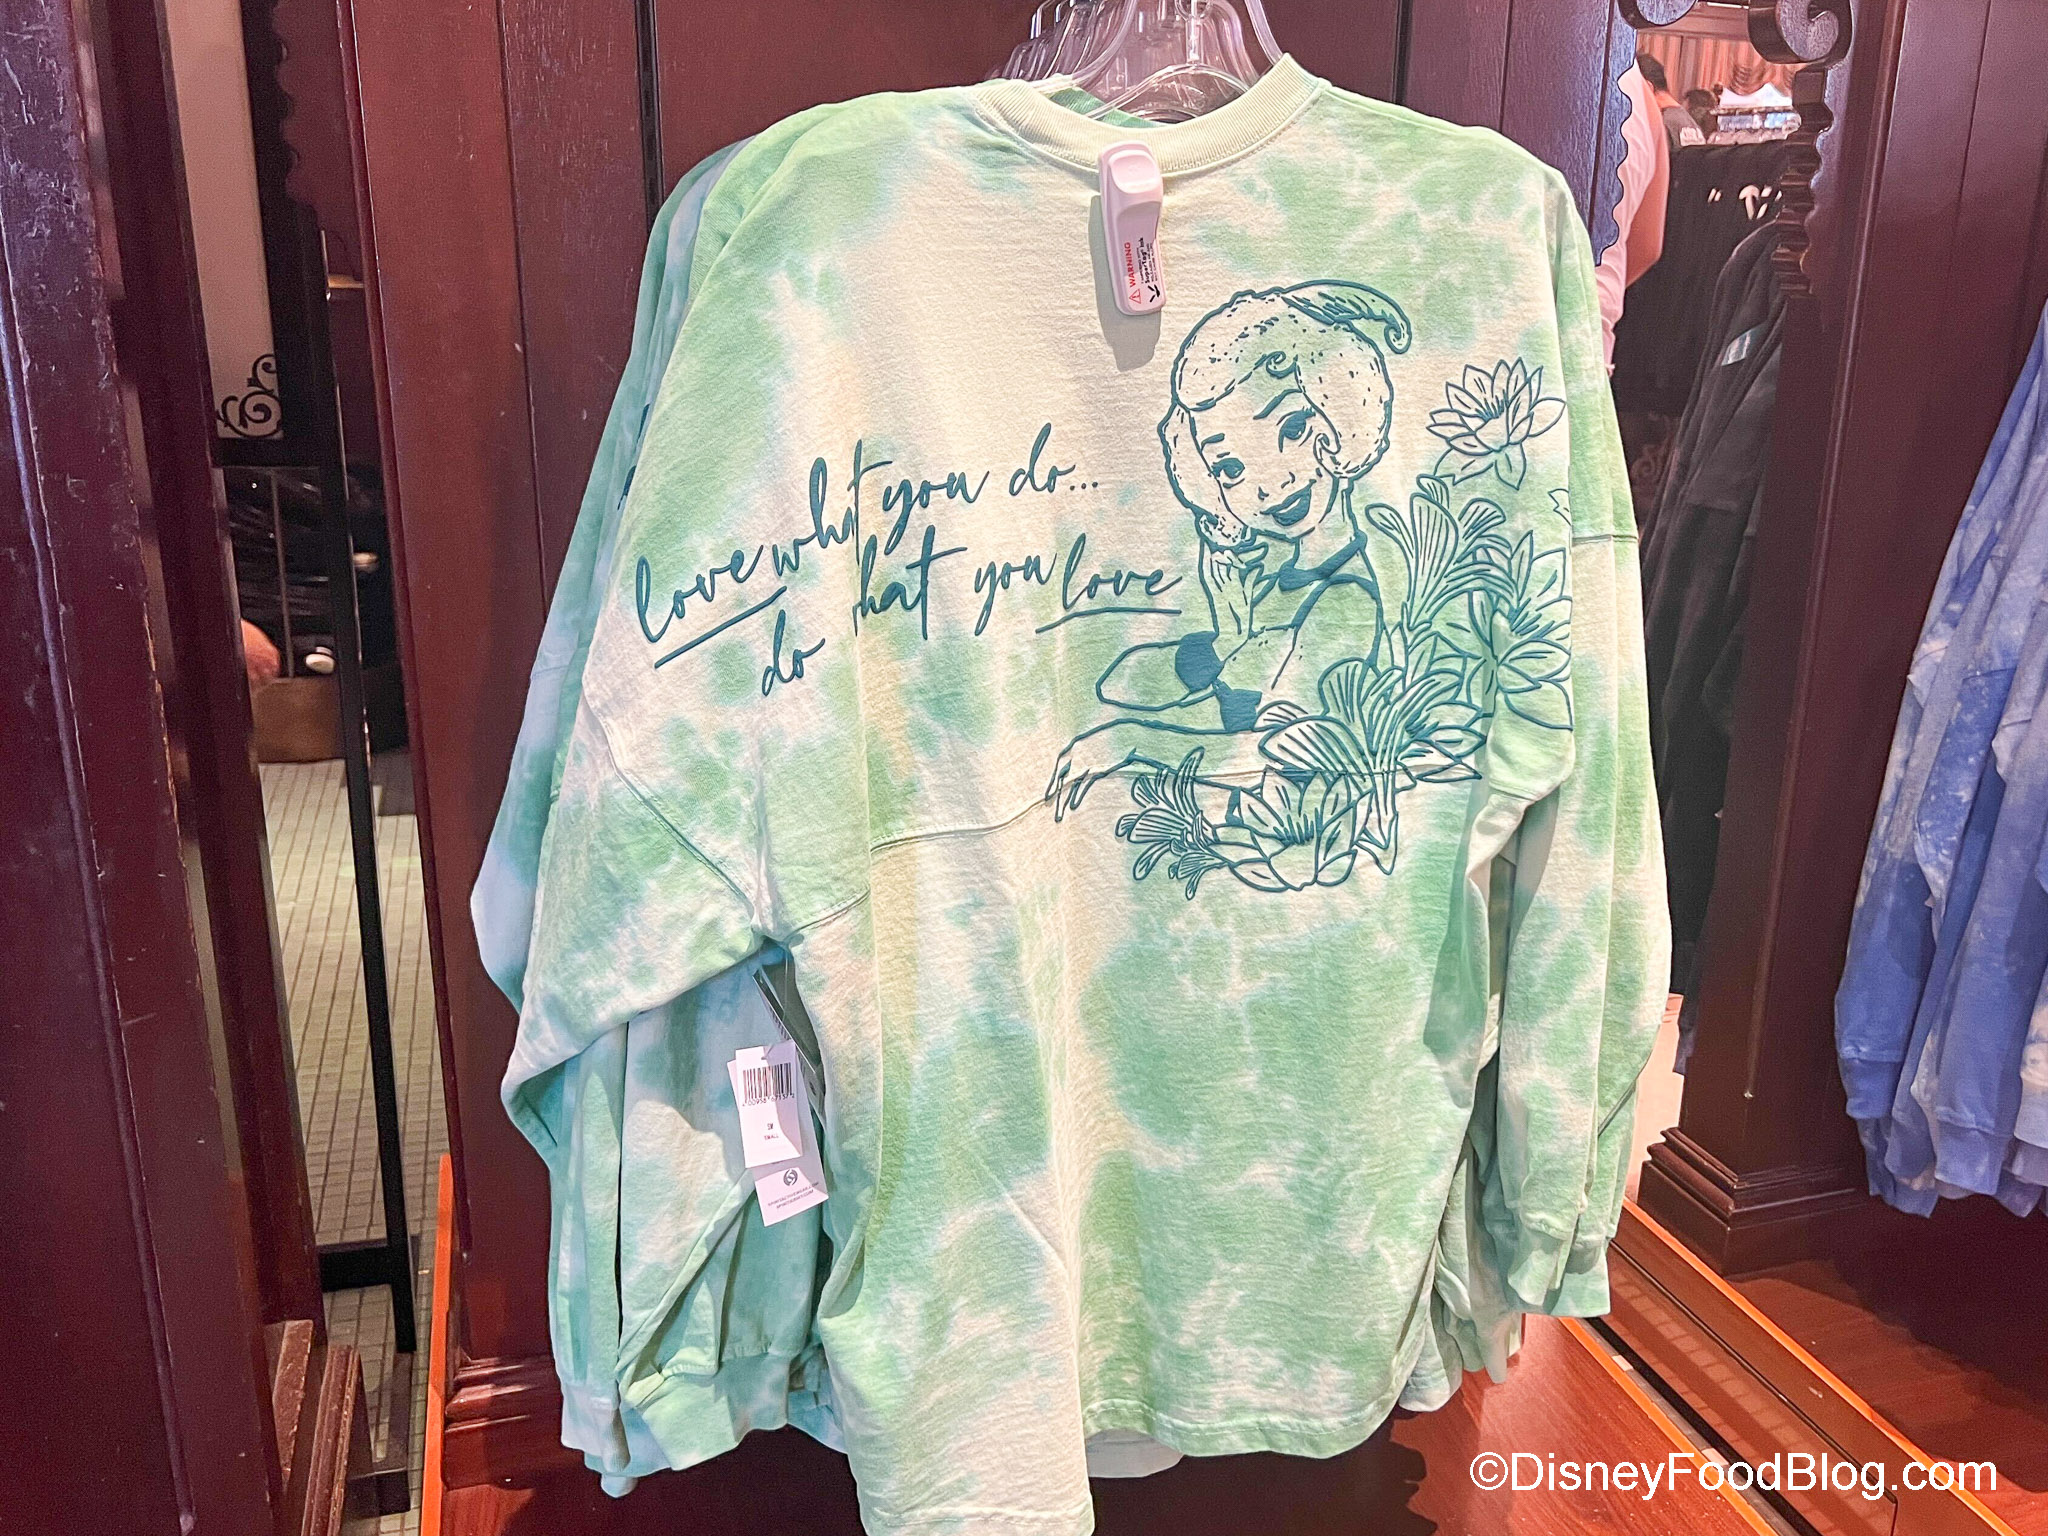 Pirates of the Caribbean Spirit Jersey was back in stock at Pieces